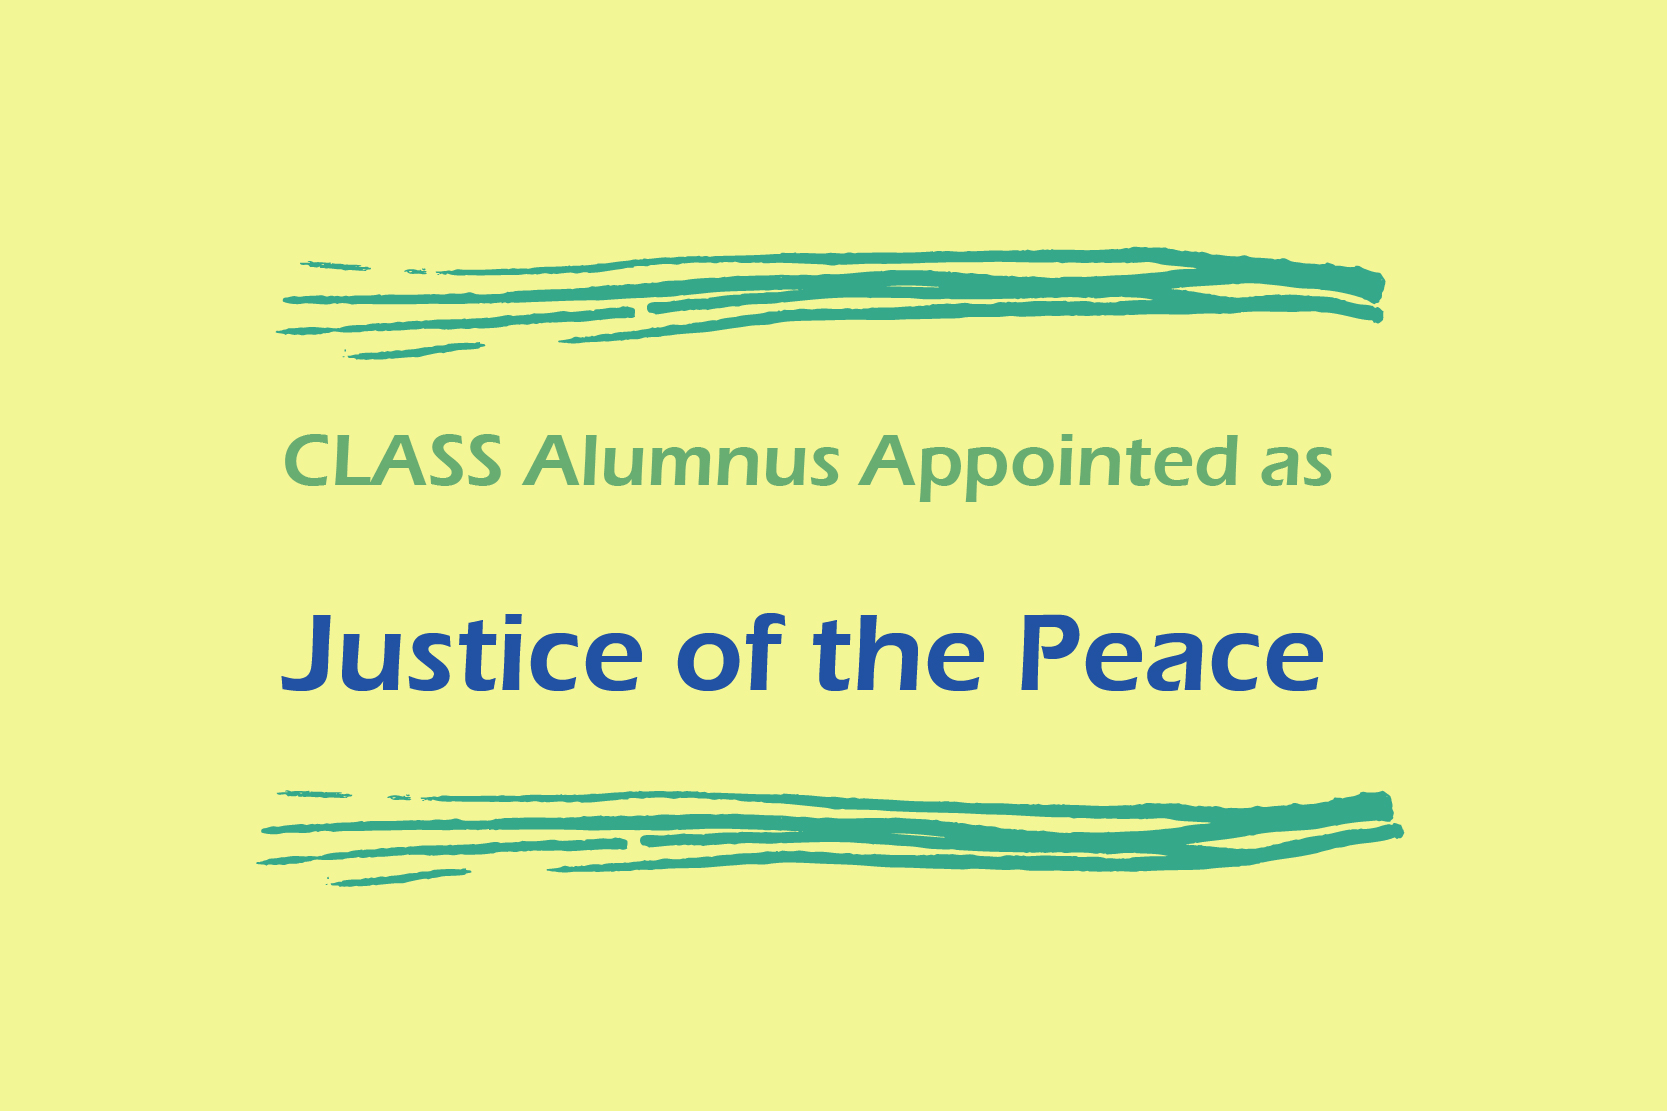 CLASS Alumnus Appointed as Justice of the Peace